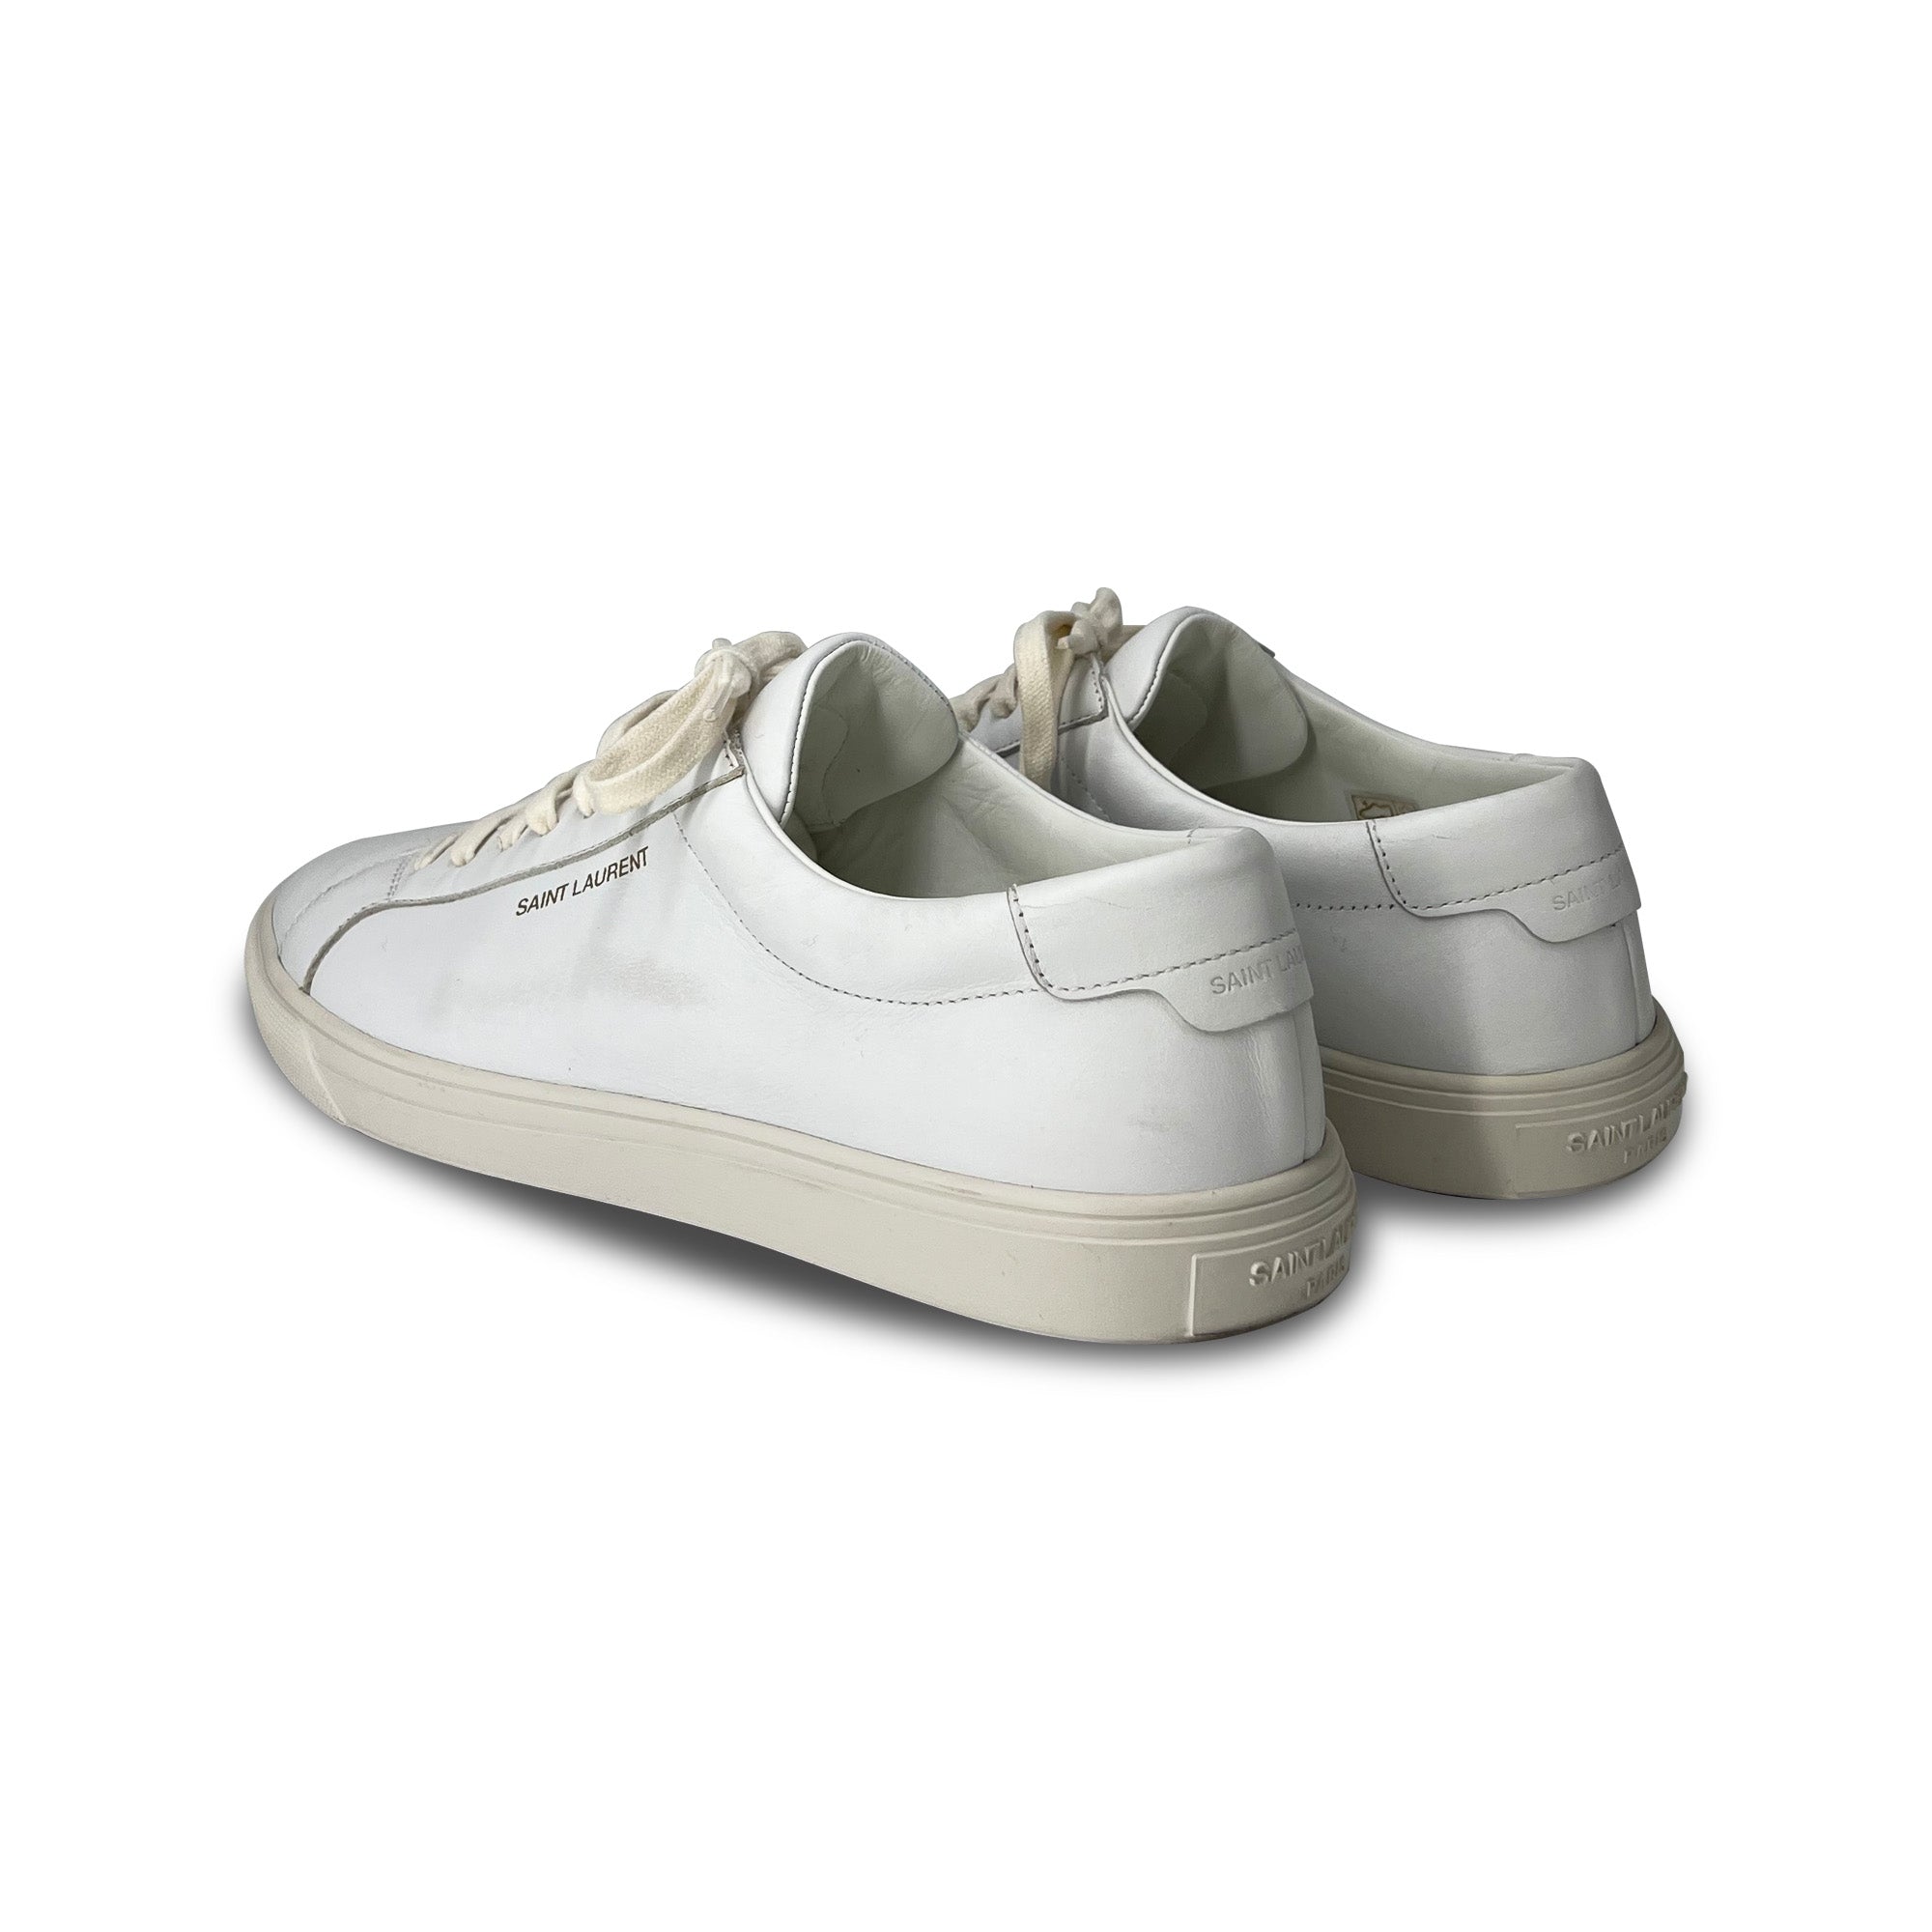 Yves Saint Laurent Andy leather sneakers